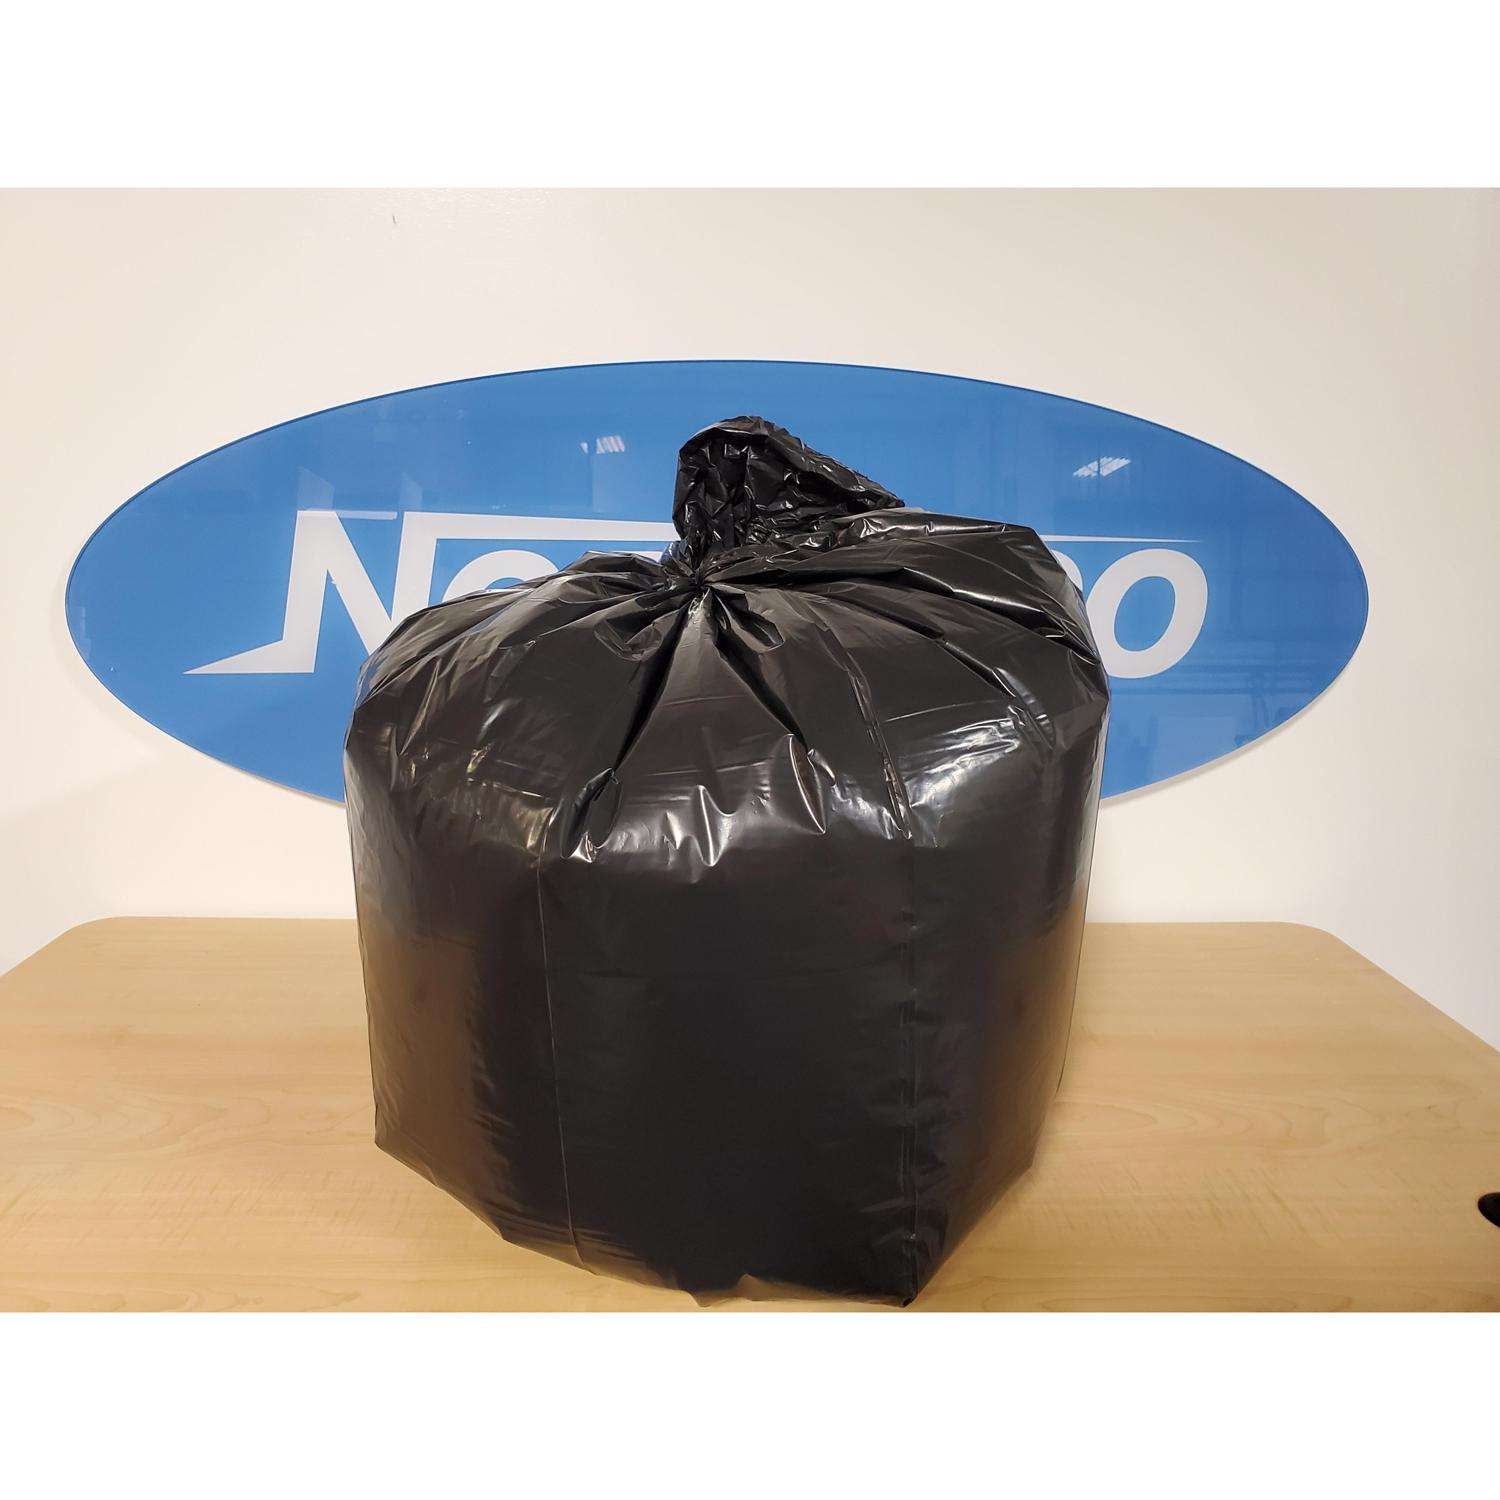 5 Gallon Grow Bags, Fabric Pots With Handles, Eco-friendly Made With 100%  Recycled PET Plastic. 